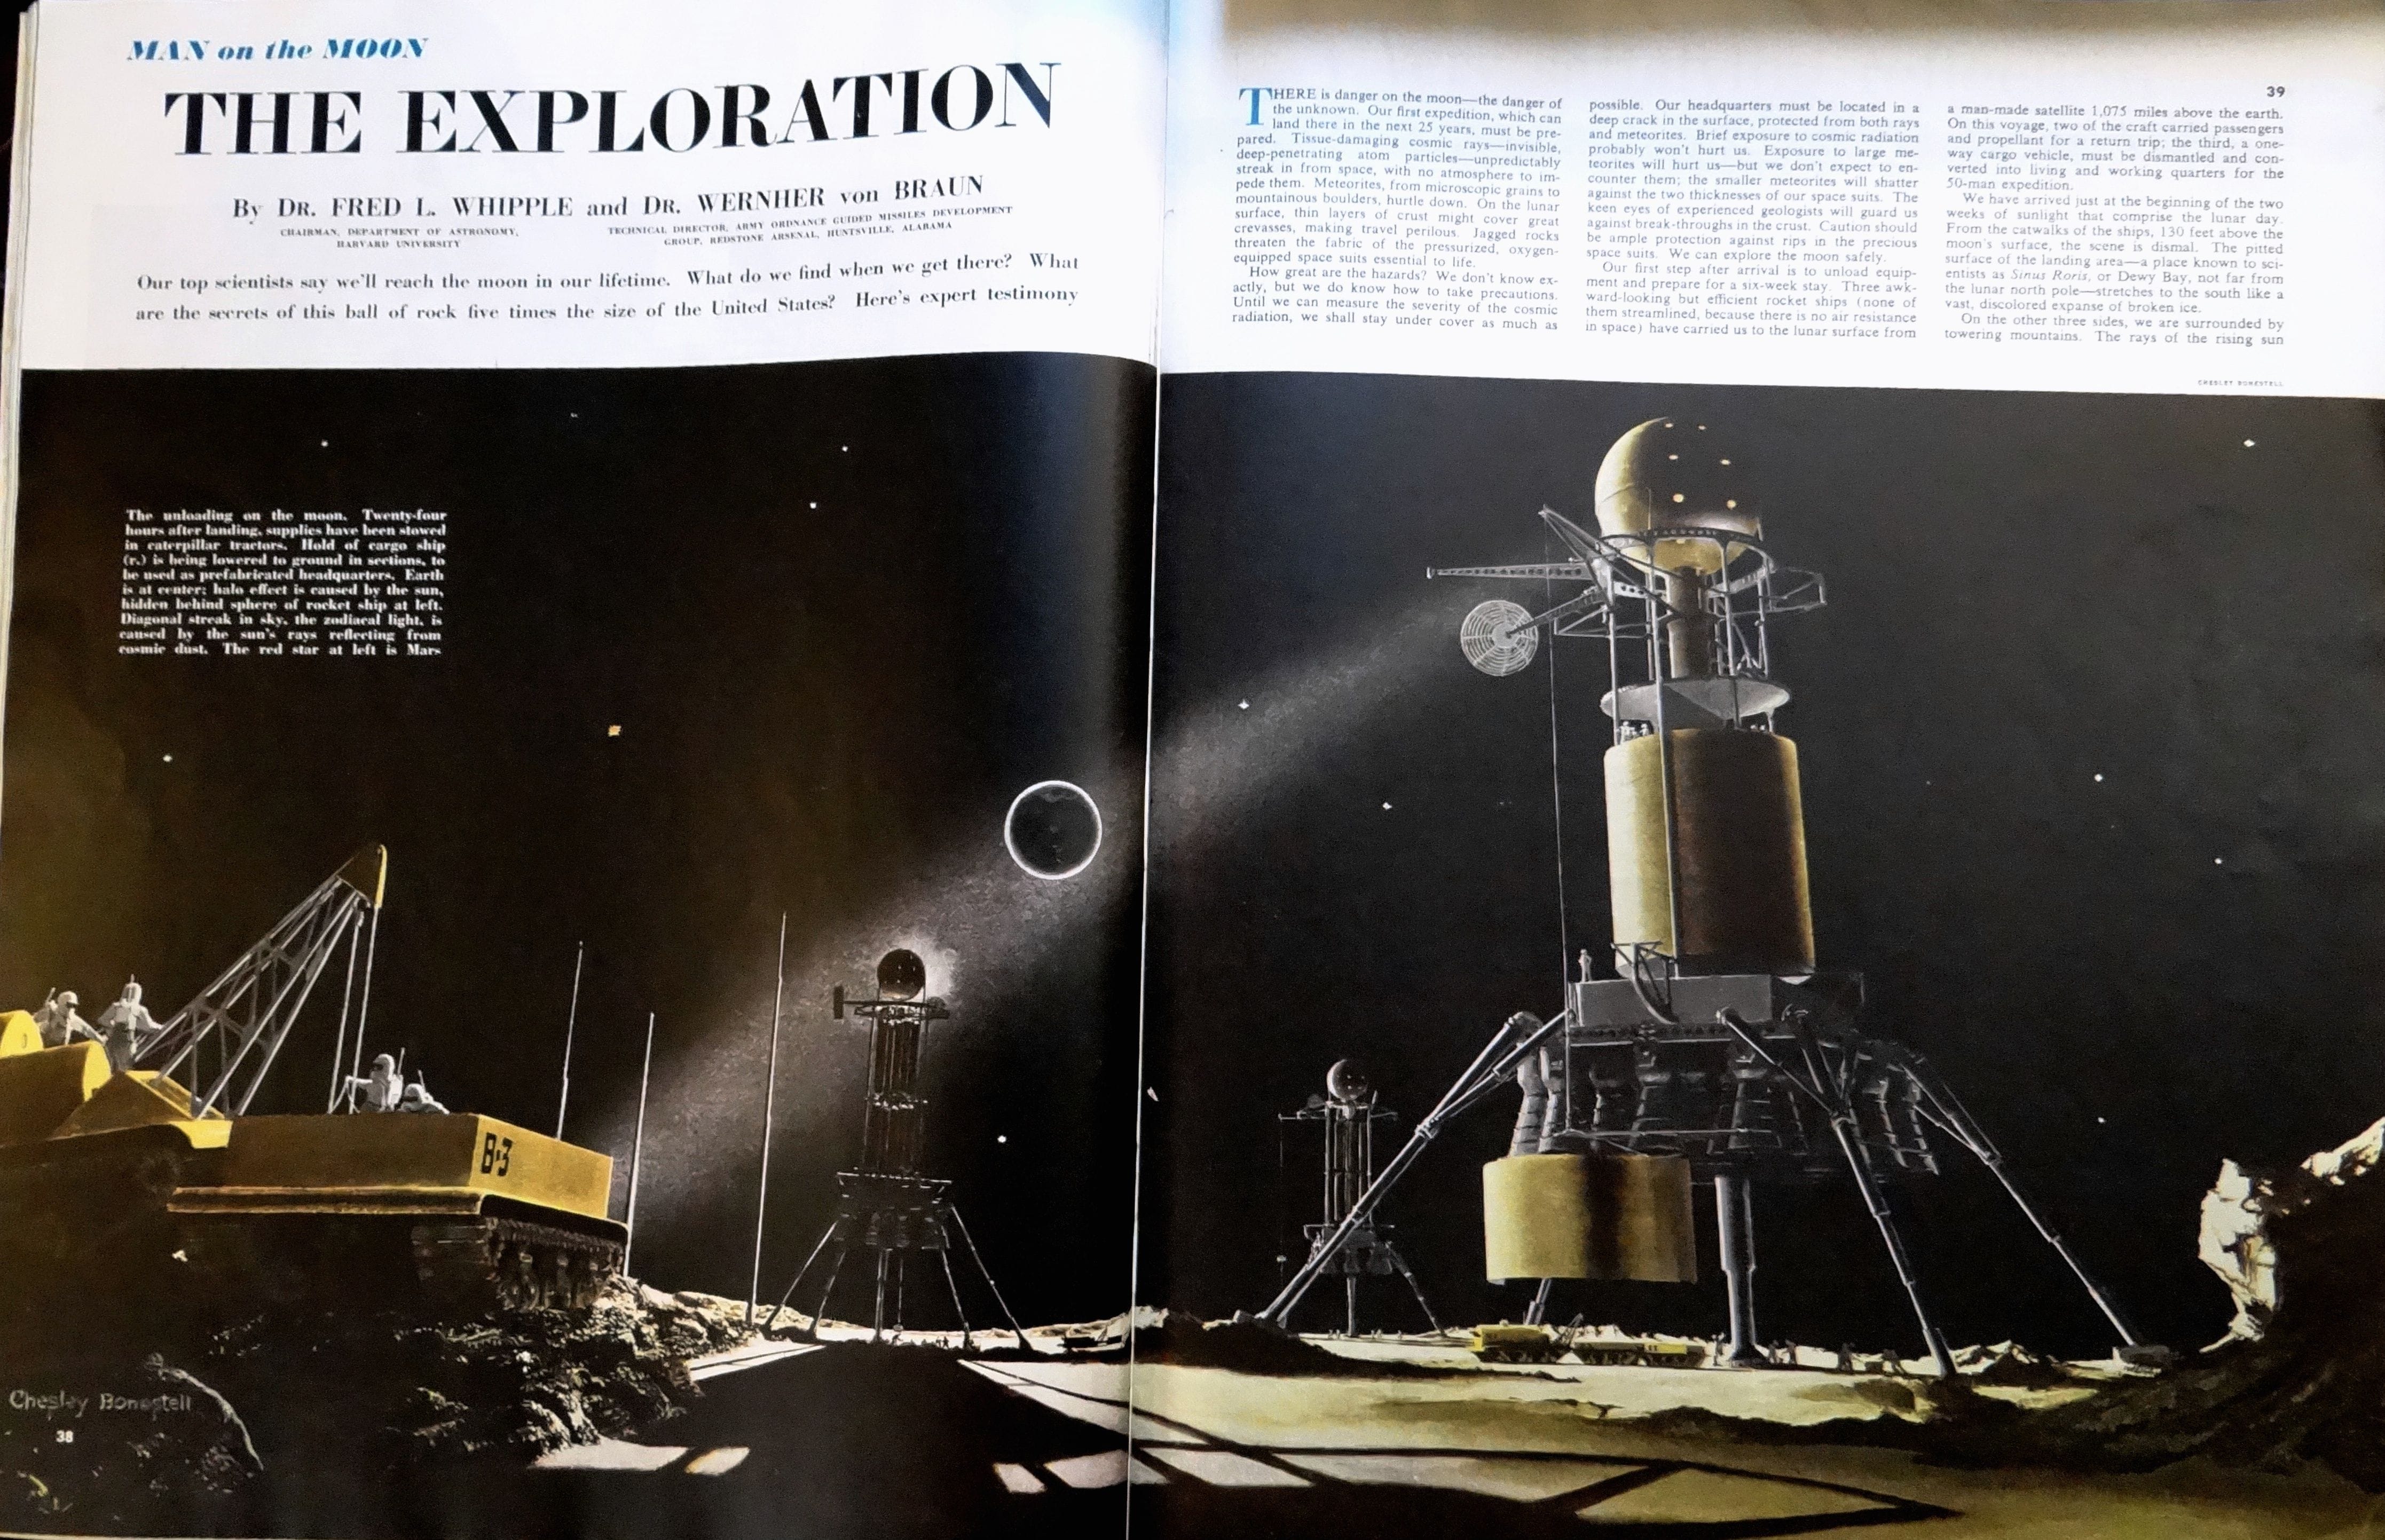 "Man on the Moon" by Chesley Bonestell in Collier's (Oct. 25, 1952)